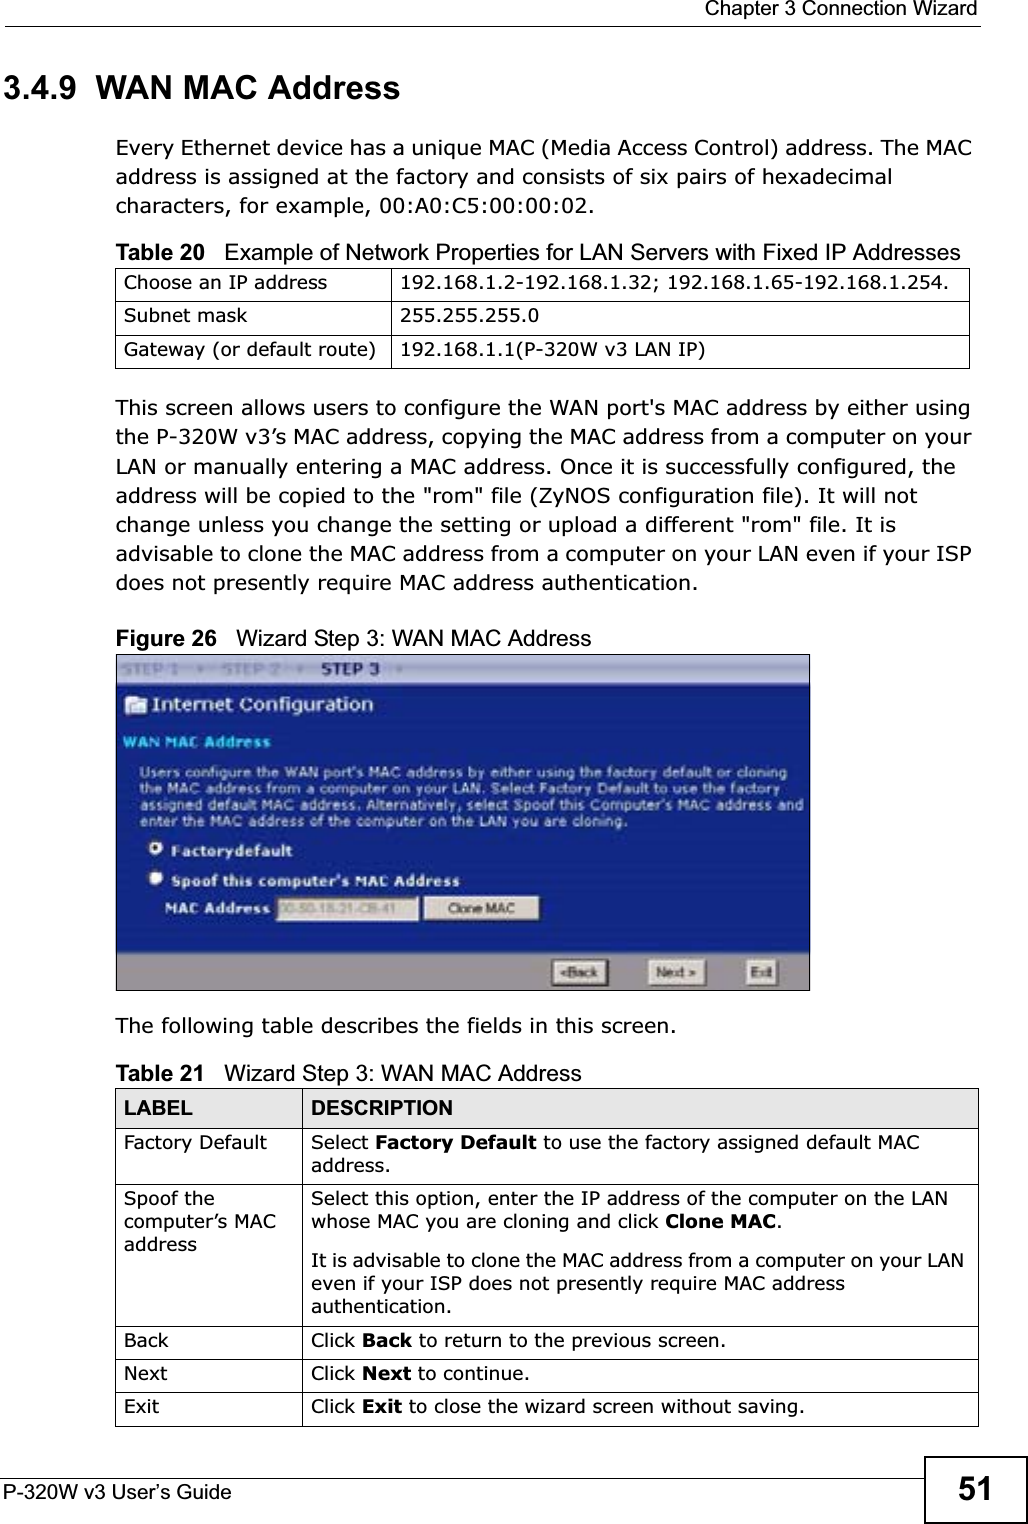  Chapter 3 Connection WizardP-320W v3 User’s Guide 513.4.9  WAN MAC AddressEvery Ethernet device has a unique MAC (Media Access Control) address. The MAC address is assigned at the factory and consists of six pairs of hexadecimal characters, for example, 00:A0:C5:00:00:02.This screen allows users to configure the WAN port&apos;s MAC address by either using the P-320W v3’s MAC address, copying the MAC address from a computer on your LAN or manually entering a MAC address. Once it is successfully configured, the address will be copied to the &quot;rom&quot; file (ZyNOS configuration file). It will not change unless you change the setting or upload a different &quot;rom&quot; file. It is advisable to clone the MAC address from a computer on your LAN even if your ISP does not presently require MAC address authentication.Figure 26   Wizard Step 3: WAN MAC AddressThe following table describes the fields in this screen.Table 20   Example of Network Properties for LAN Servers with Fixed IP AddressesChoose an IP address 192.168.1.2-192.168.1.32; 192.168.1.65-192.168.1.254.Subnet mask  255.255.255.0Gateway (or default route) 192.168.1.1(P-320W v3 LAN IP)Table 21   Wizard Step 3: WAN MAC AddressLABEL DESCRIPTIONFactory Default Select Factory Default to use the factory assigned default MAC address.Spoof the computer’s MAC addressSelect this option, enter the IP address of the computer on the LAN whose MAC you are cloning and click Clone MAC.It is advisable to clone the MAC address from a computer on your LAN even if your ISP does not presently require MAC address authentication.Back Click Back to return to the previous screen.Next Click Next to continue. Exit Click Exit to close the wizard screen without saving.